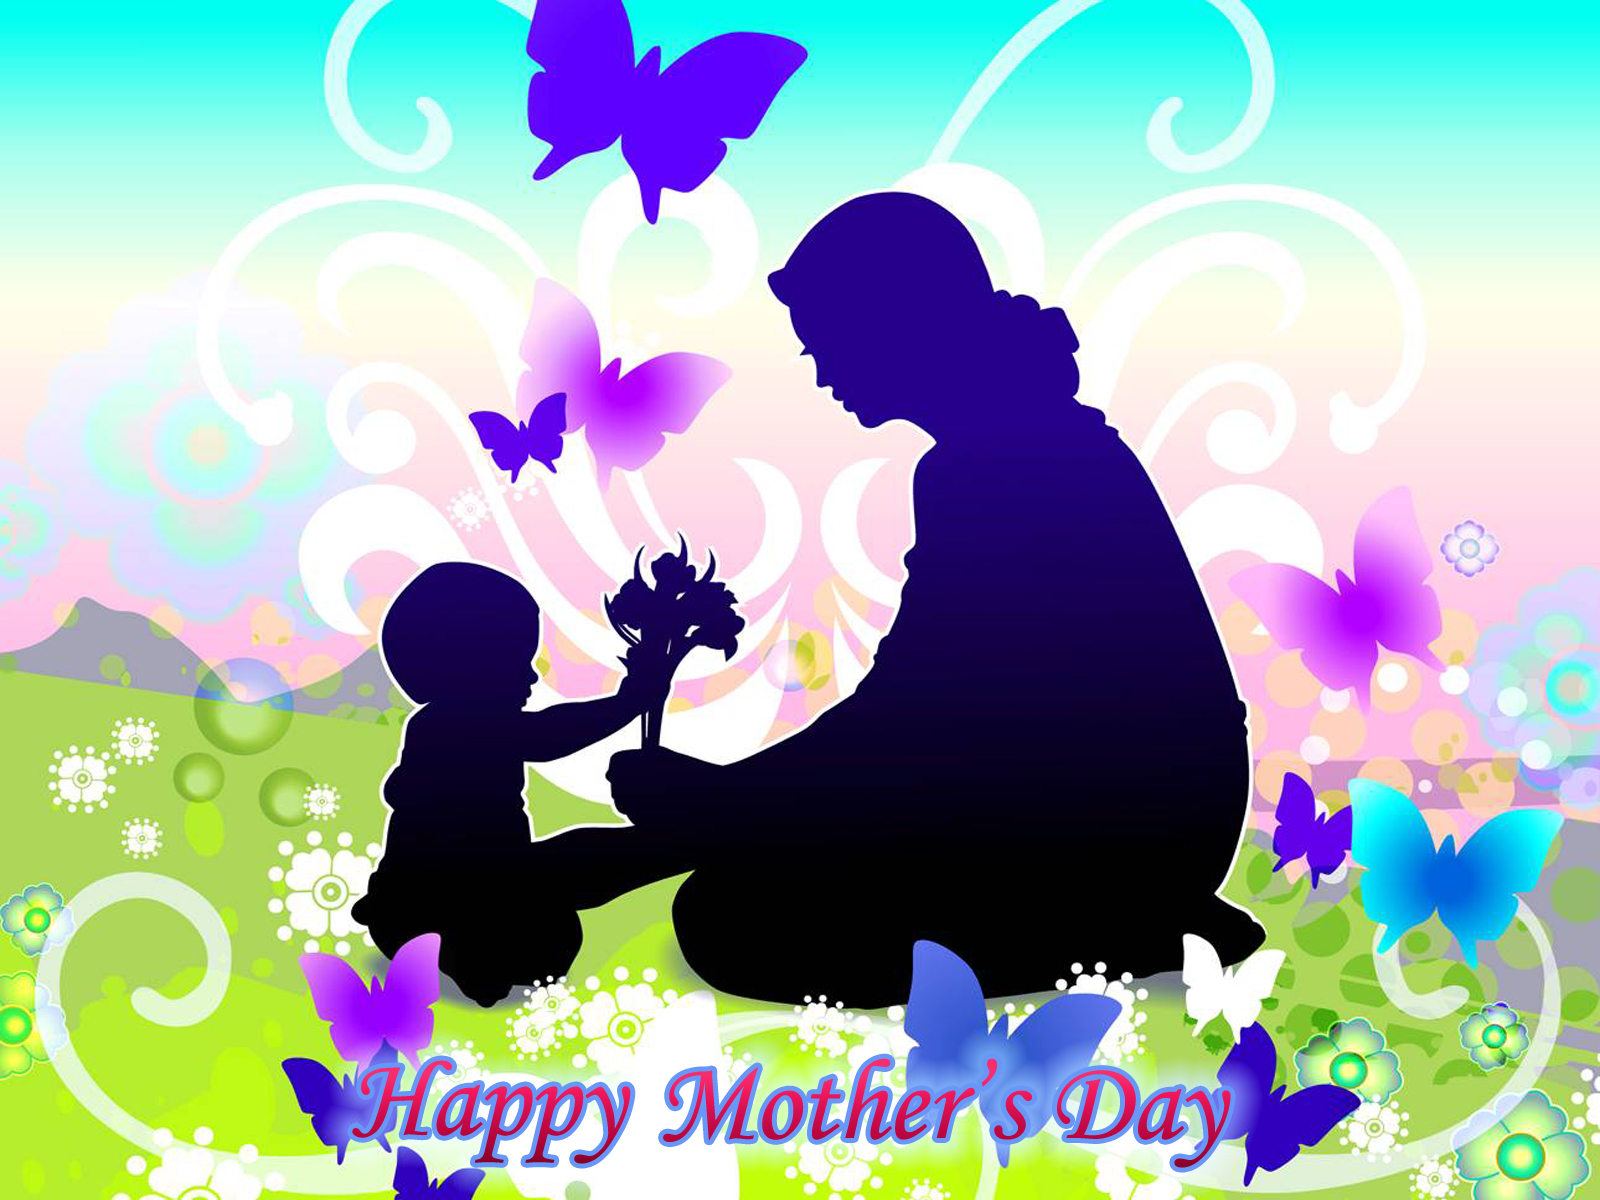 Happy Mothers Day HD Backgrounds